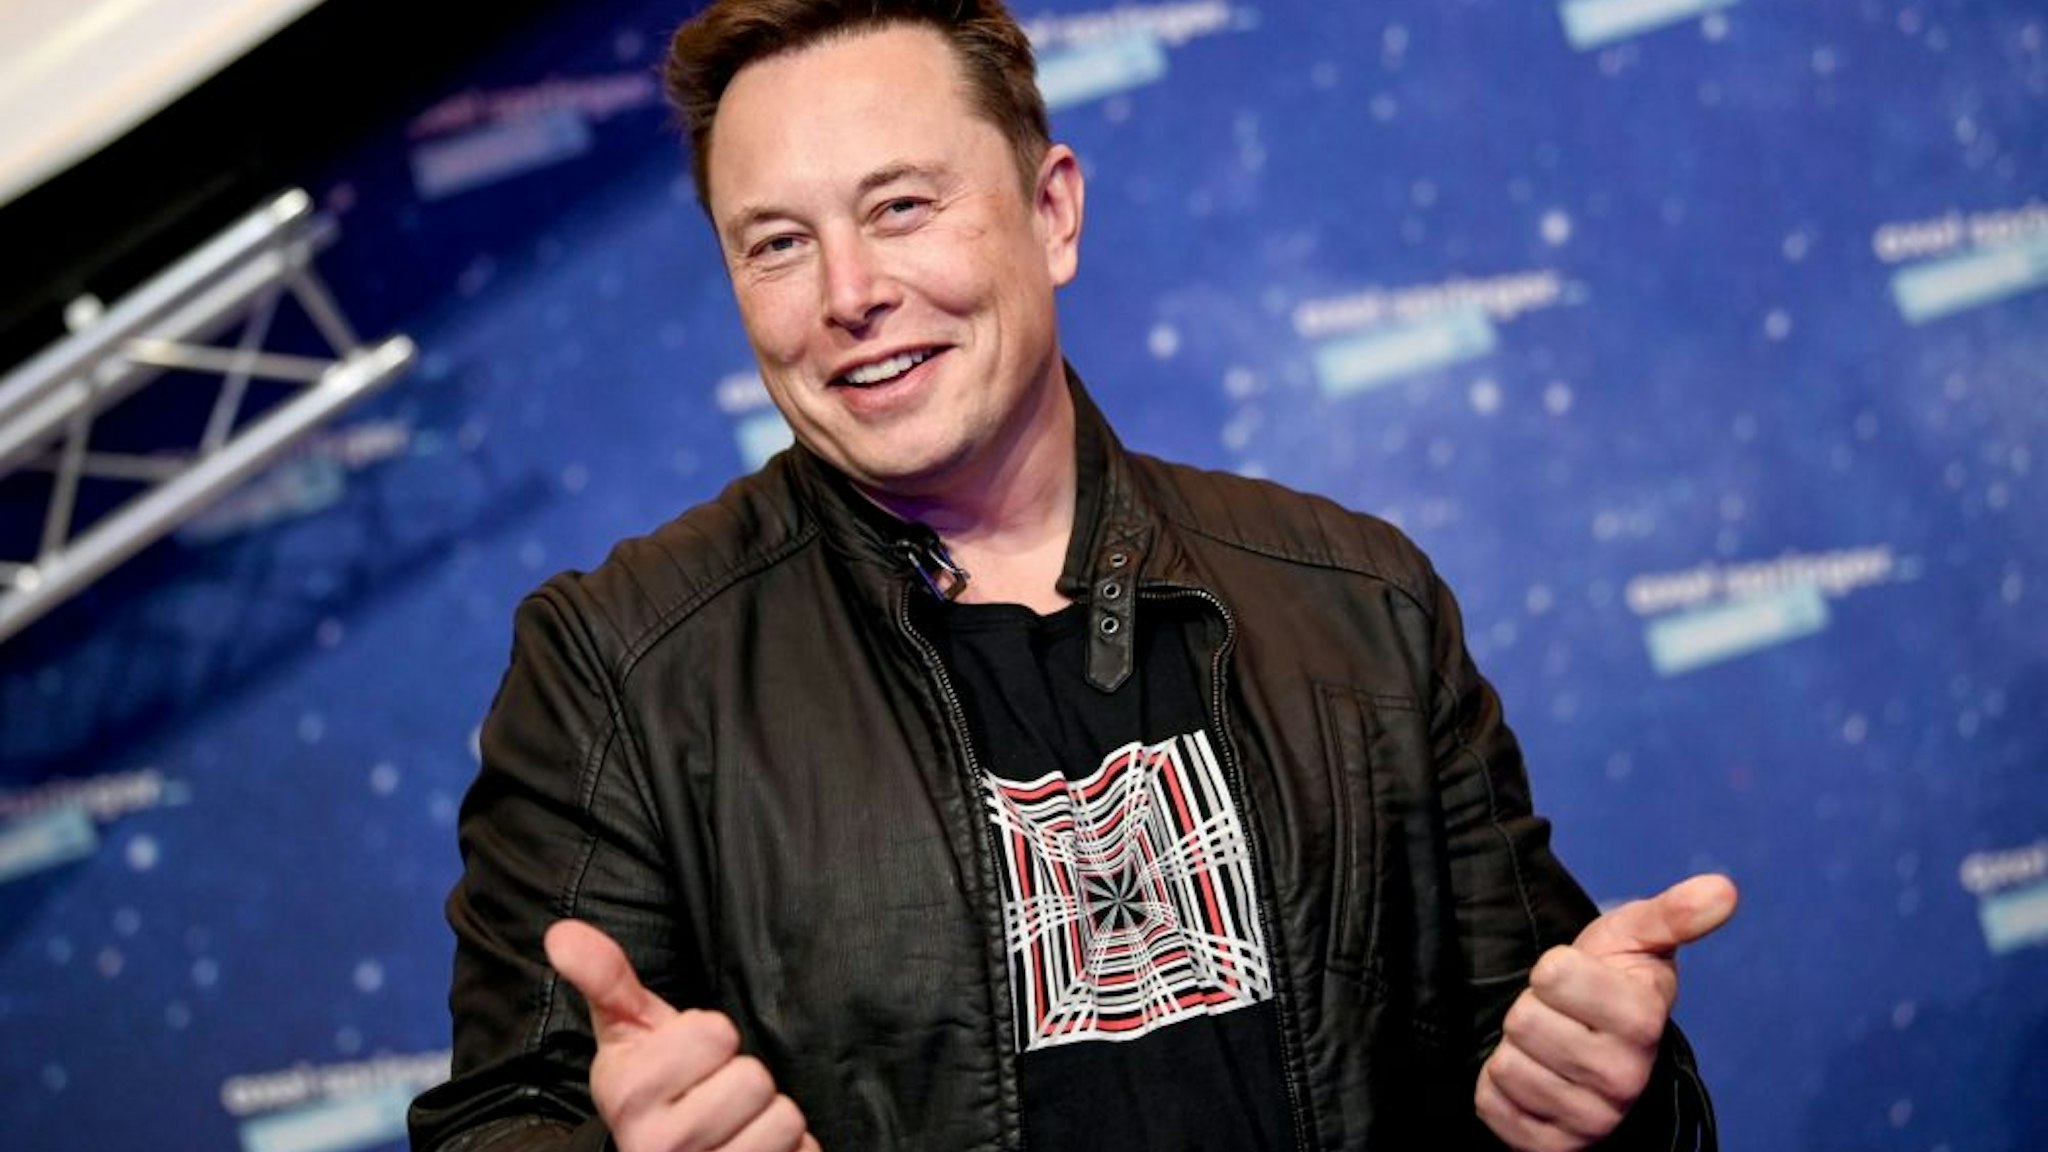 SpaceX owner and Tesla CEO Elon Musk poses as he arrives on the red carpet for the Axel Springer Awards ceremony, in Berlin, on December 1, 2020.